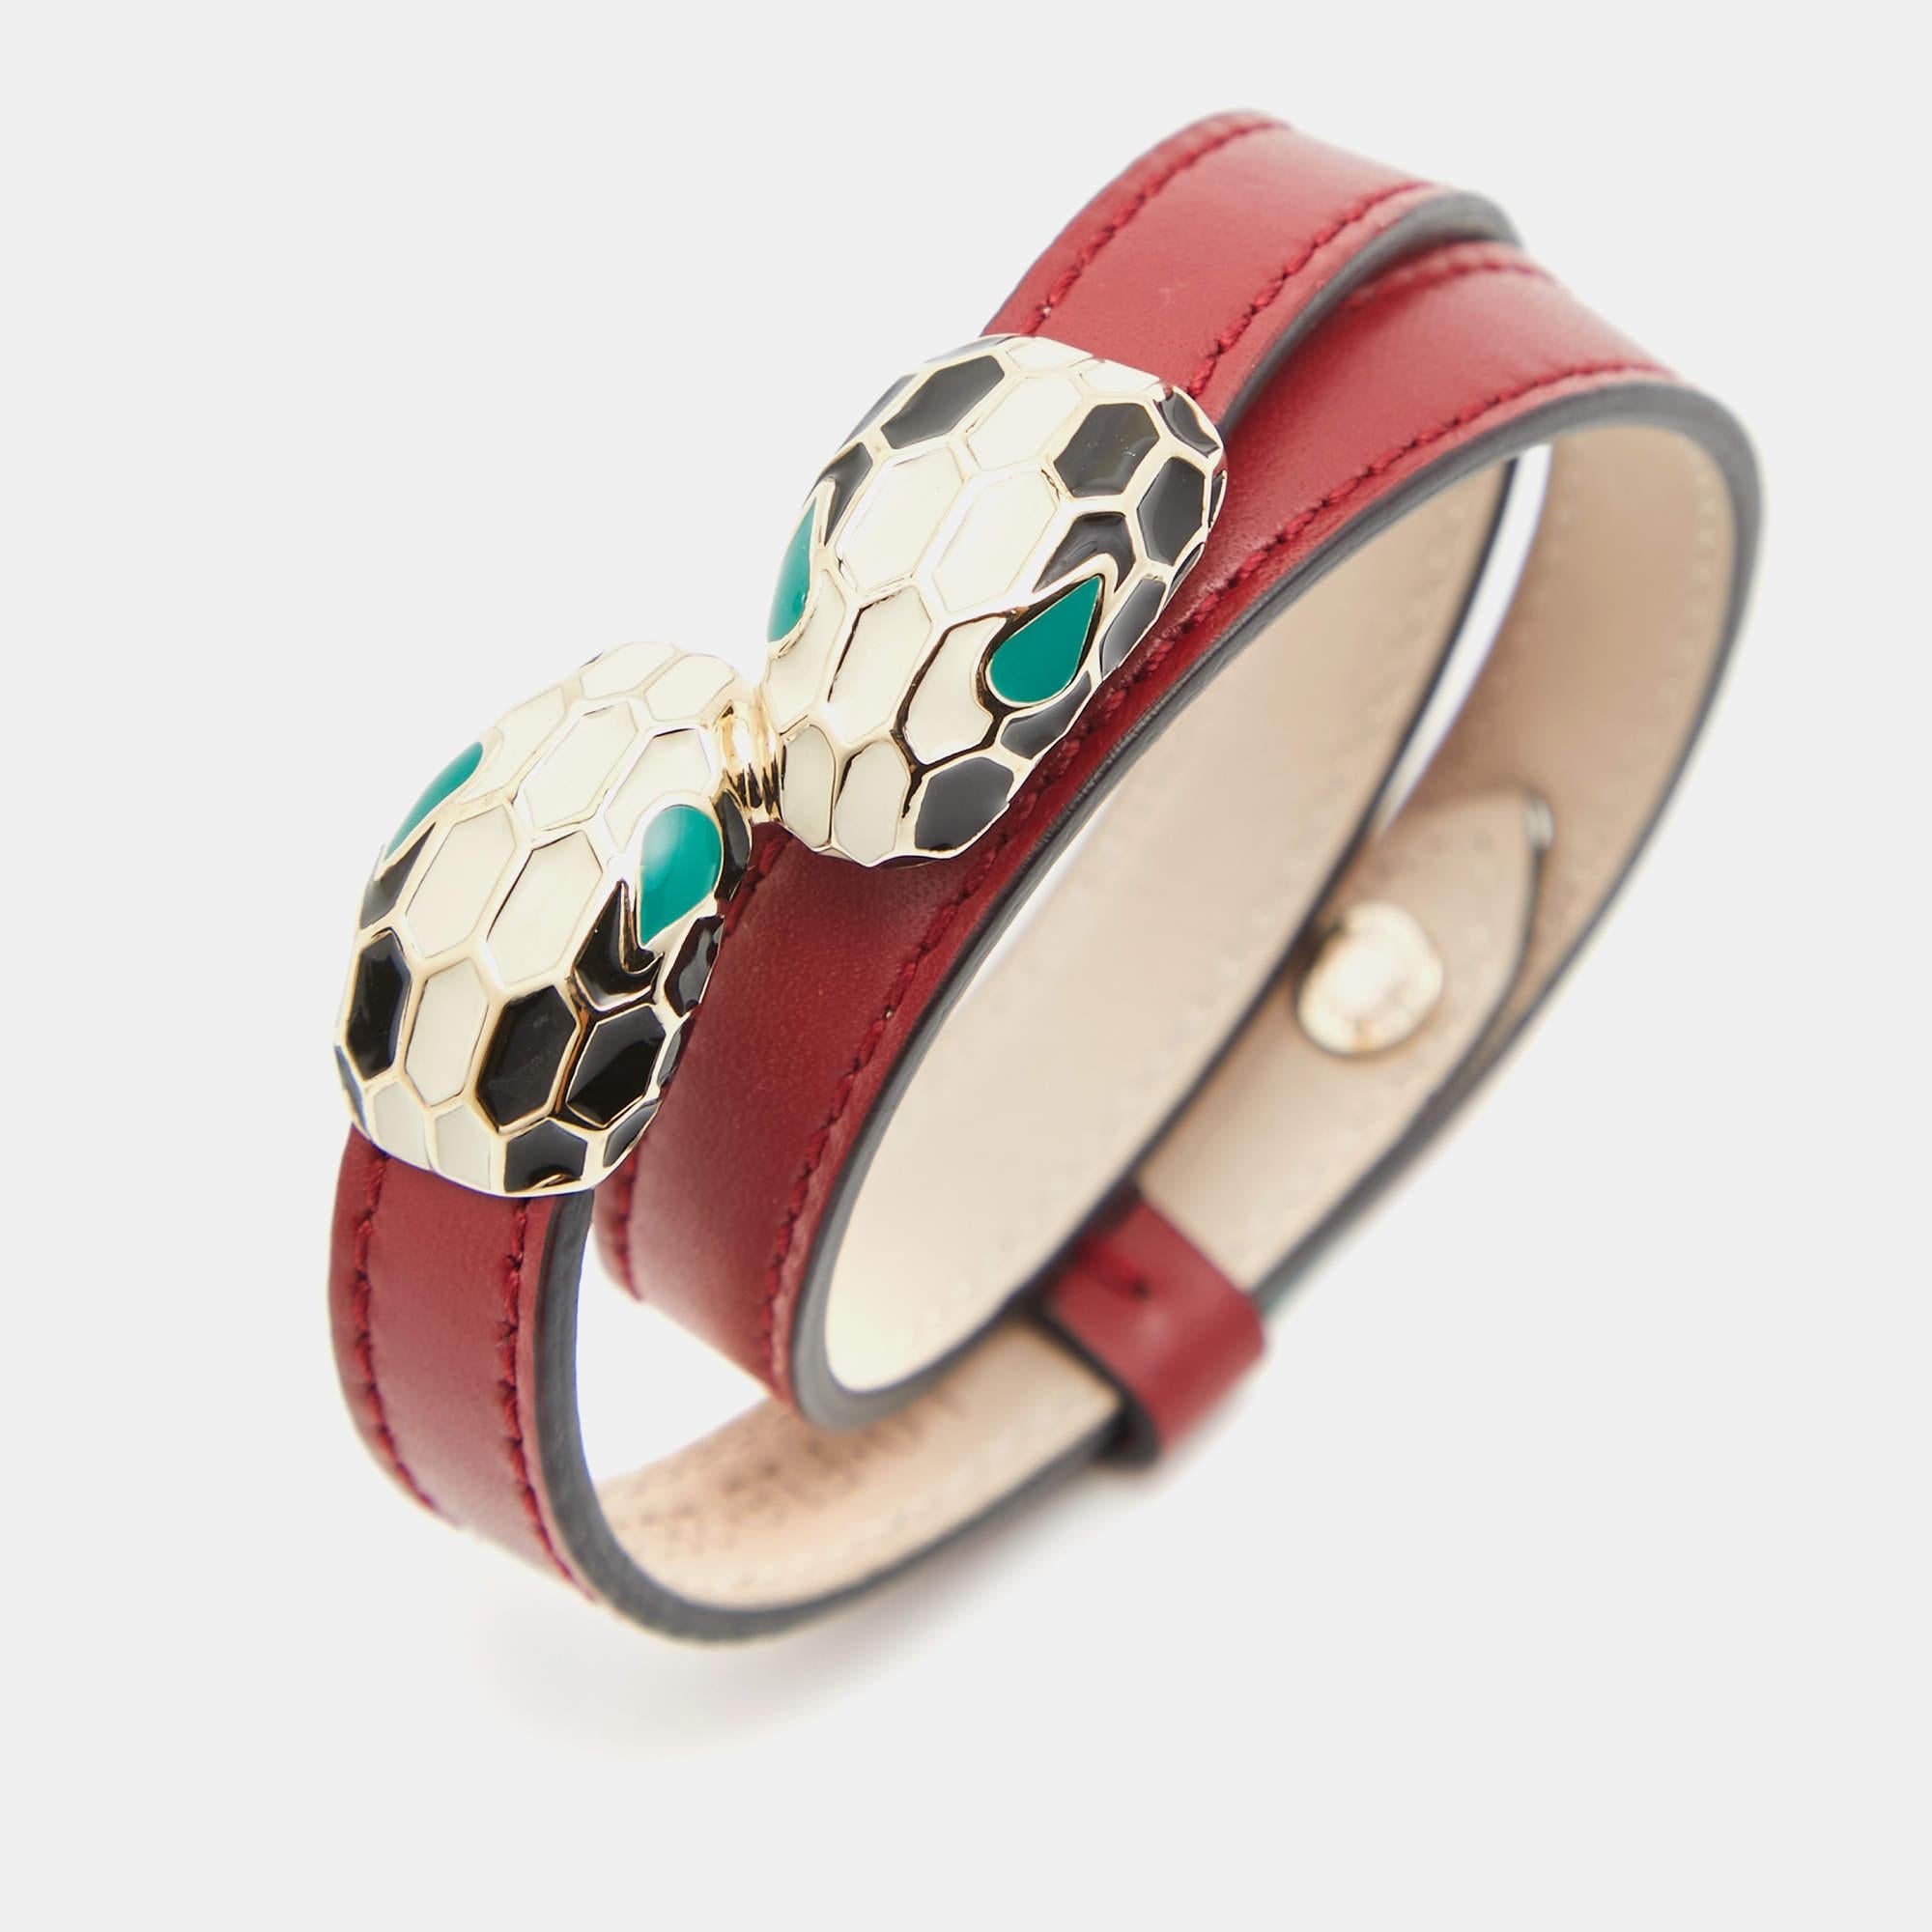 Strikingly beautiful, this bracelet from Bvlgari is sure to adorn your wrist with utmost elegance. It is a part of the brand's Serpenti Forever collection and is highlighted by a gold-tone metal Serpenti head and a coiled leather strap. The bracelet